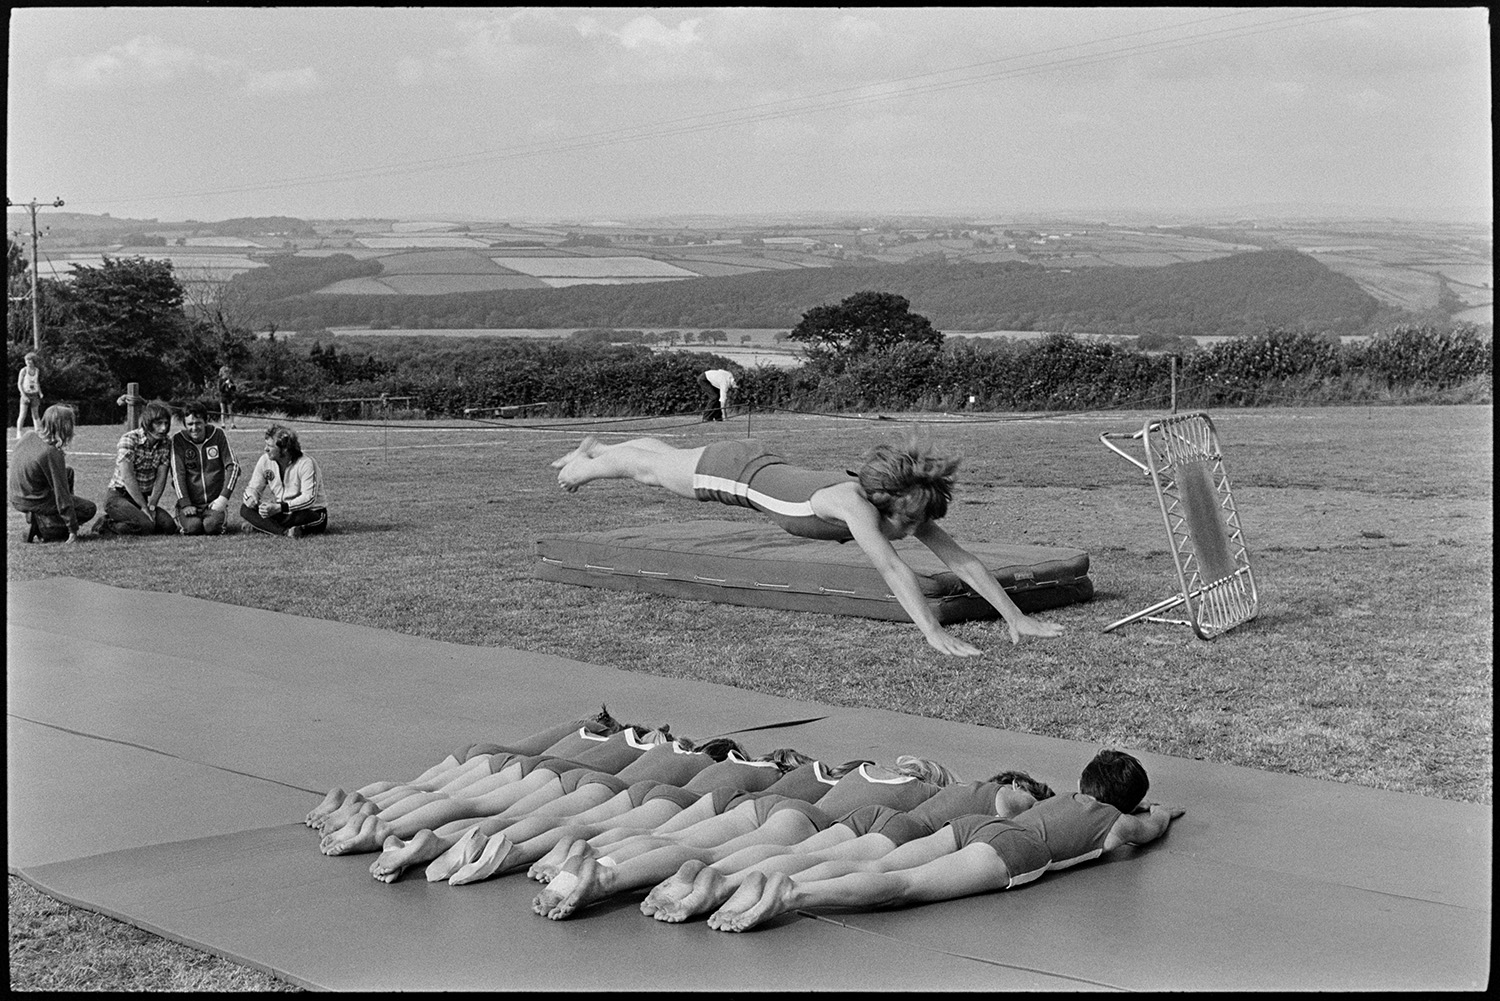 Gymnasts and fancy dress at fete. 
[Gymnasts performing a routine in a field at Atherington fete. One gymnast is jumping over nine other gymnasts lying on the ground. People are watching the routine in the background.]